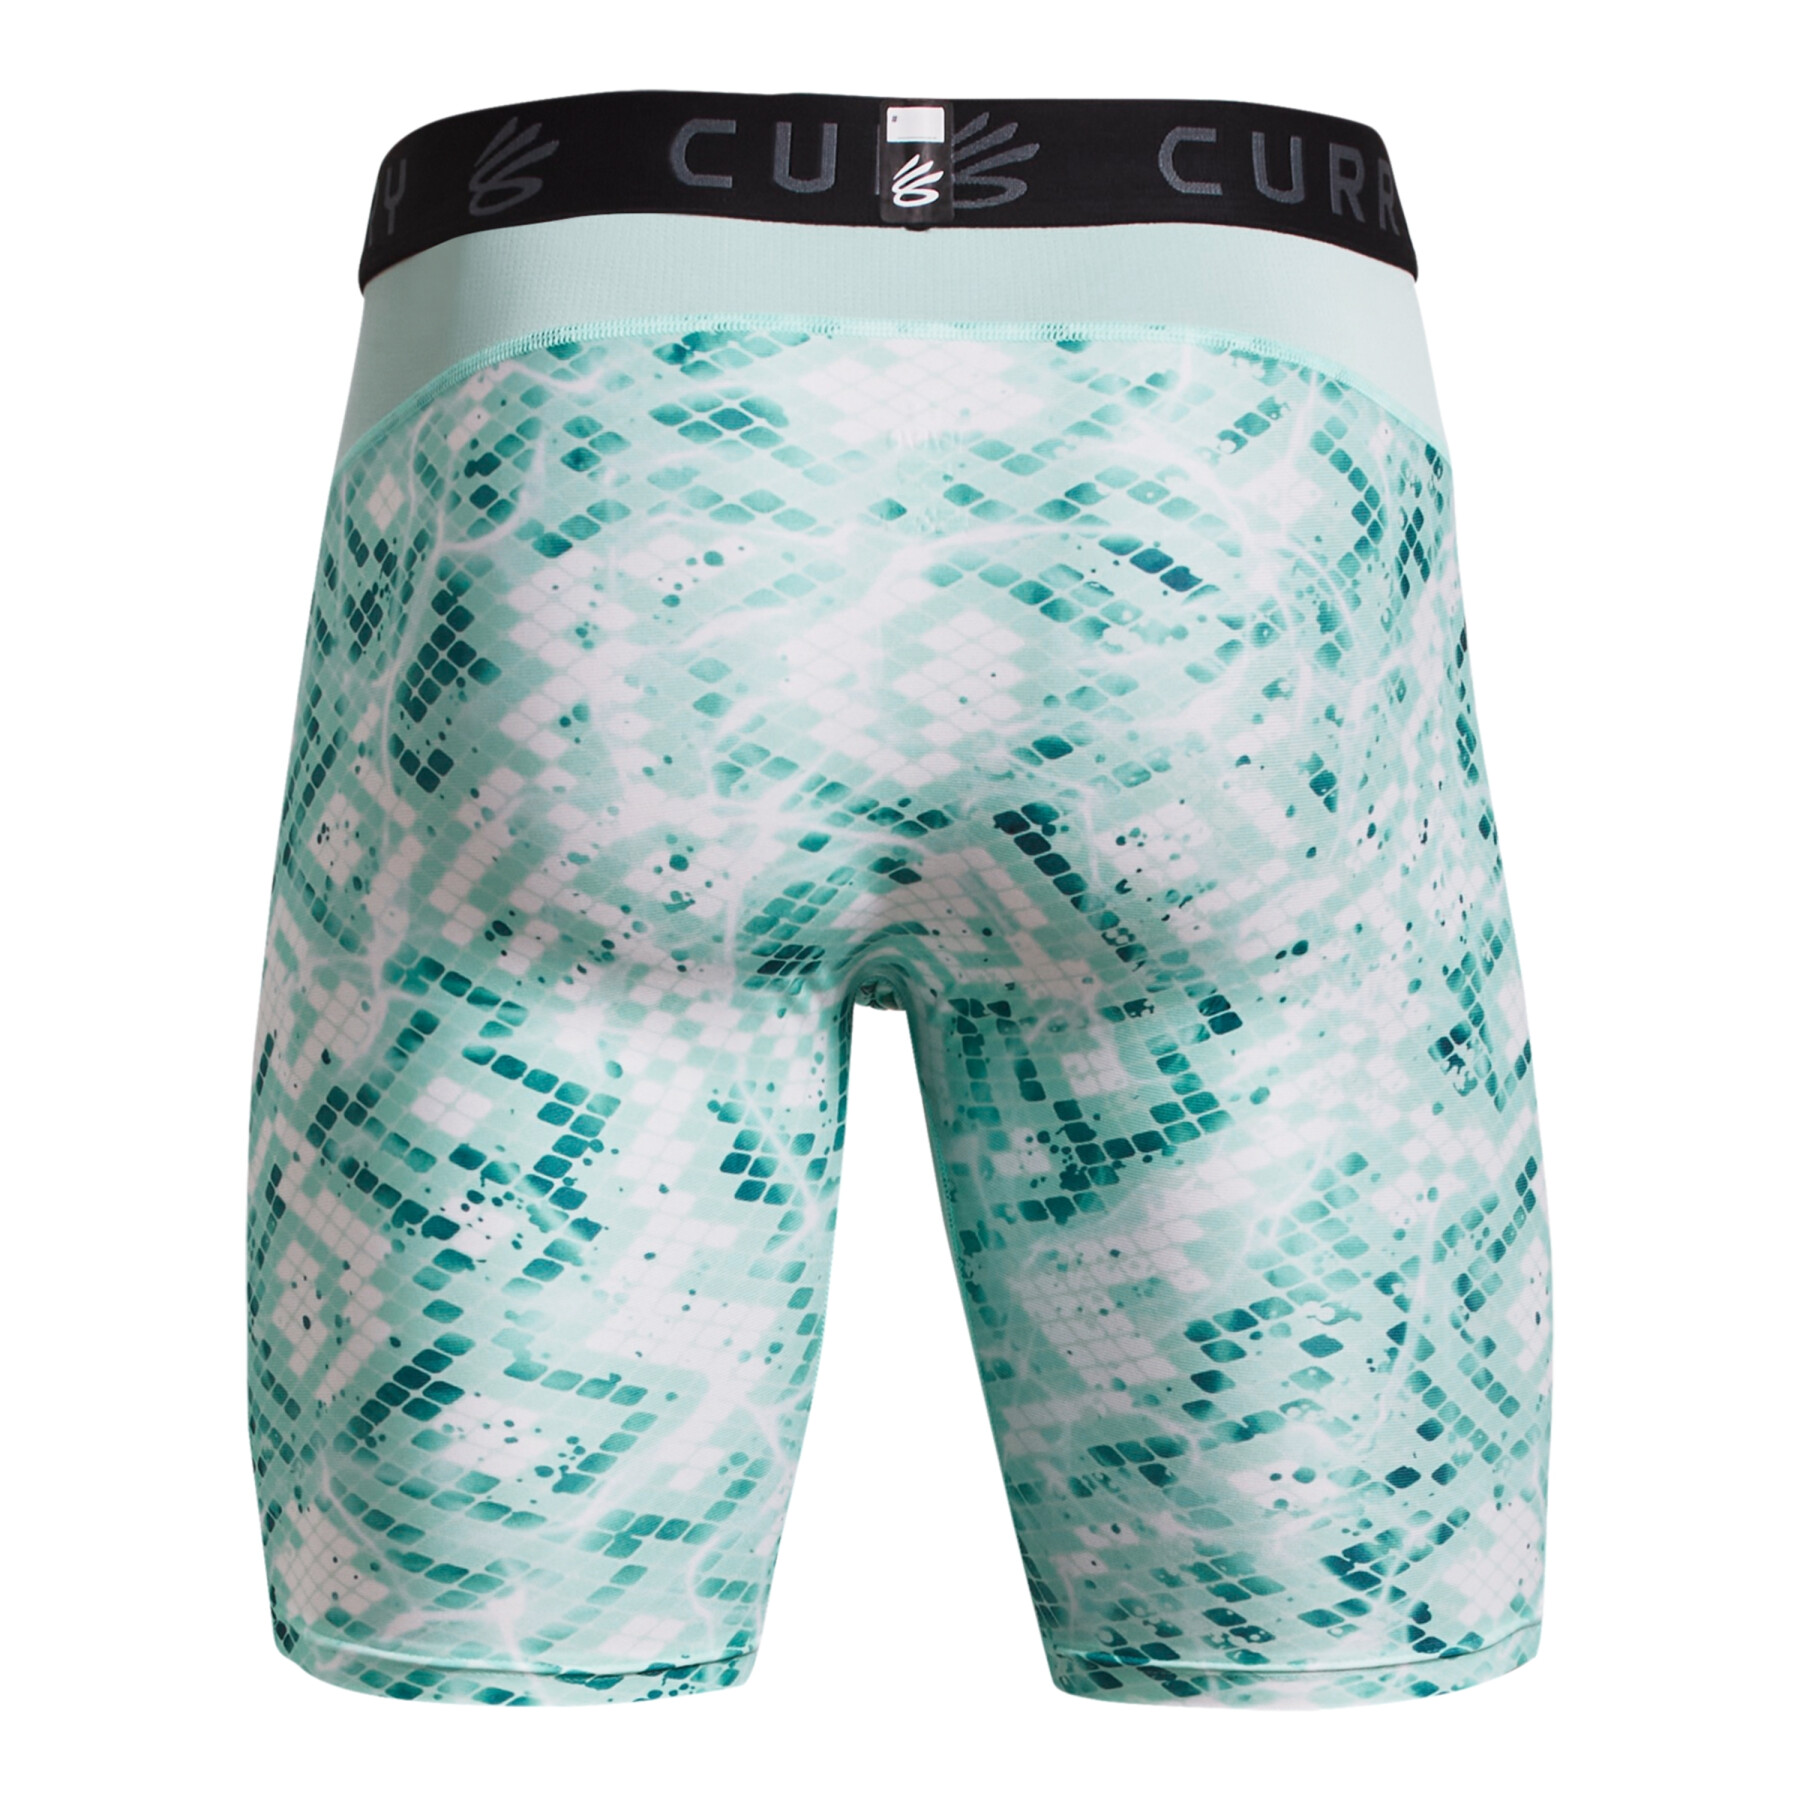 Printed shorts Under Armour Curry HG